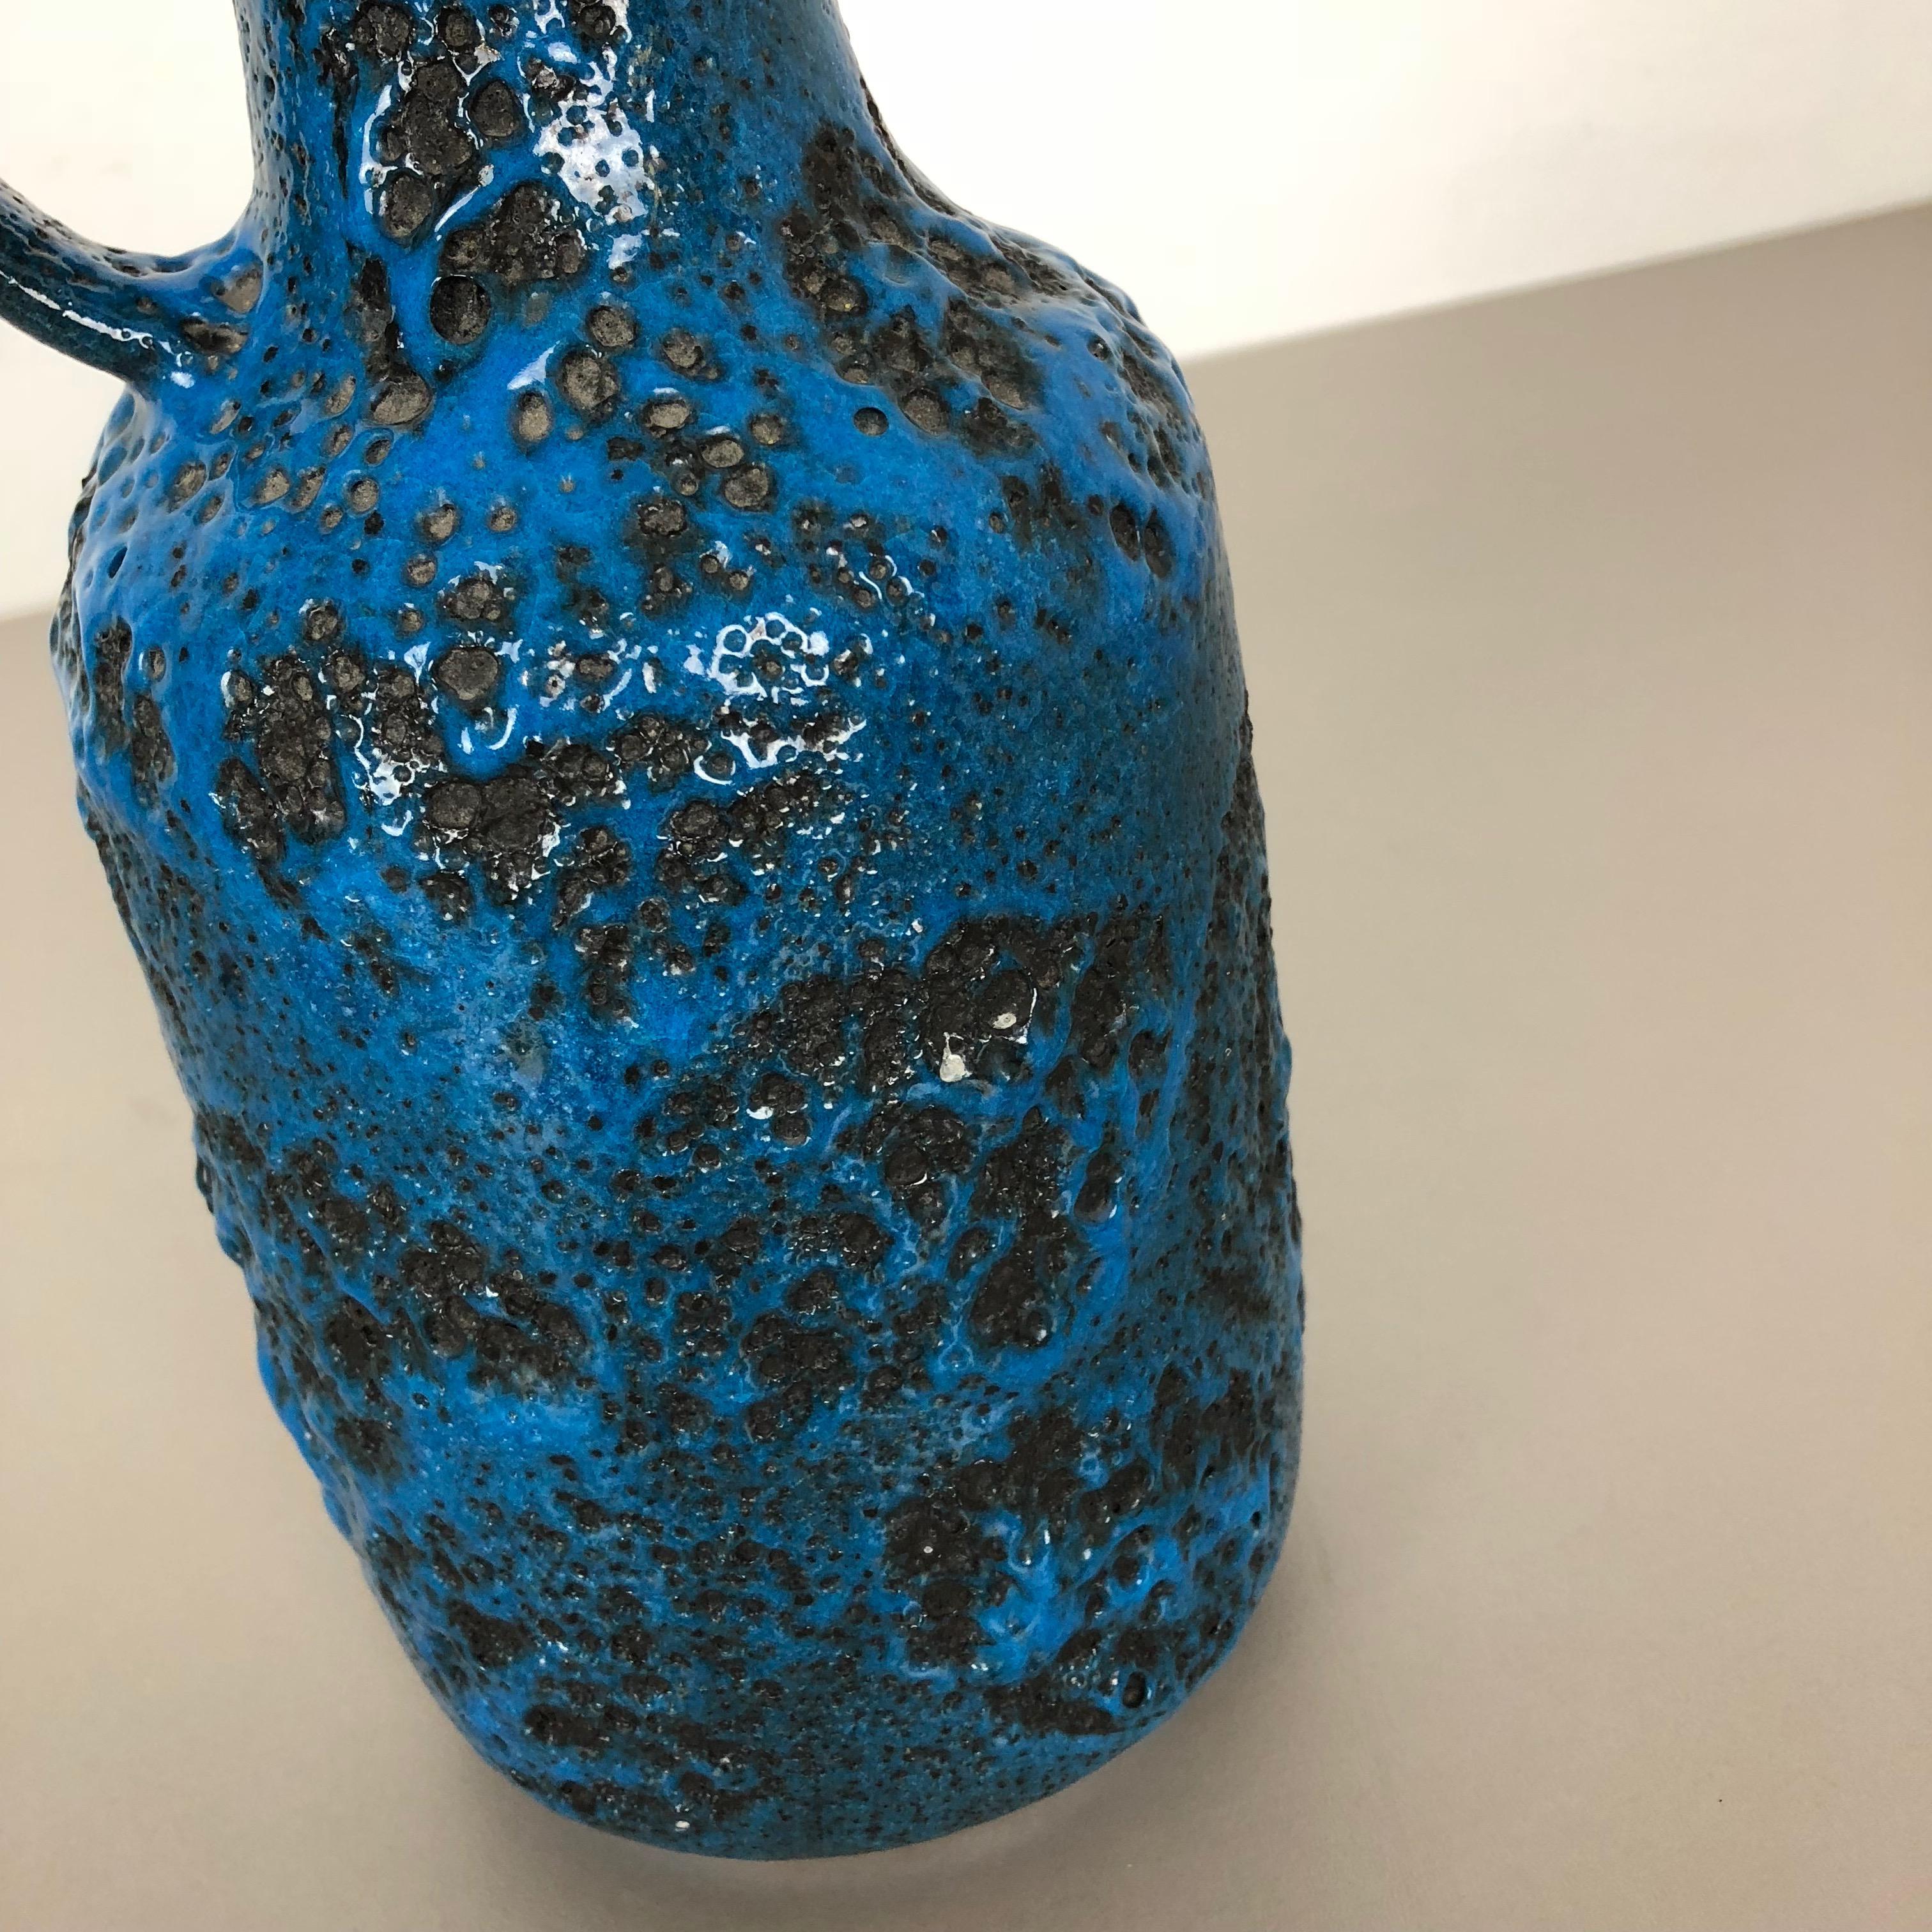 Super Colorful Fat Lava Pottery Vase by Gräflich Ortenburg, Germany, 1950s For Sale 3